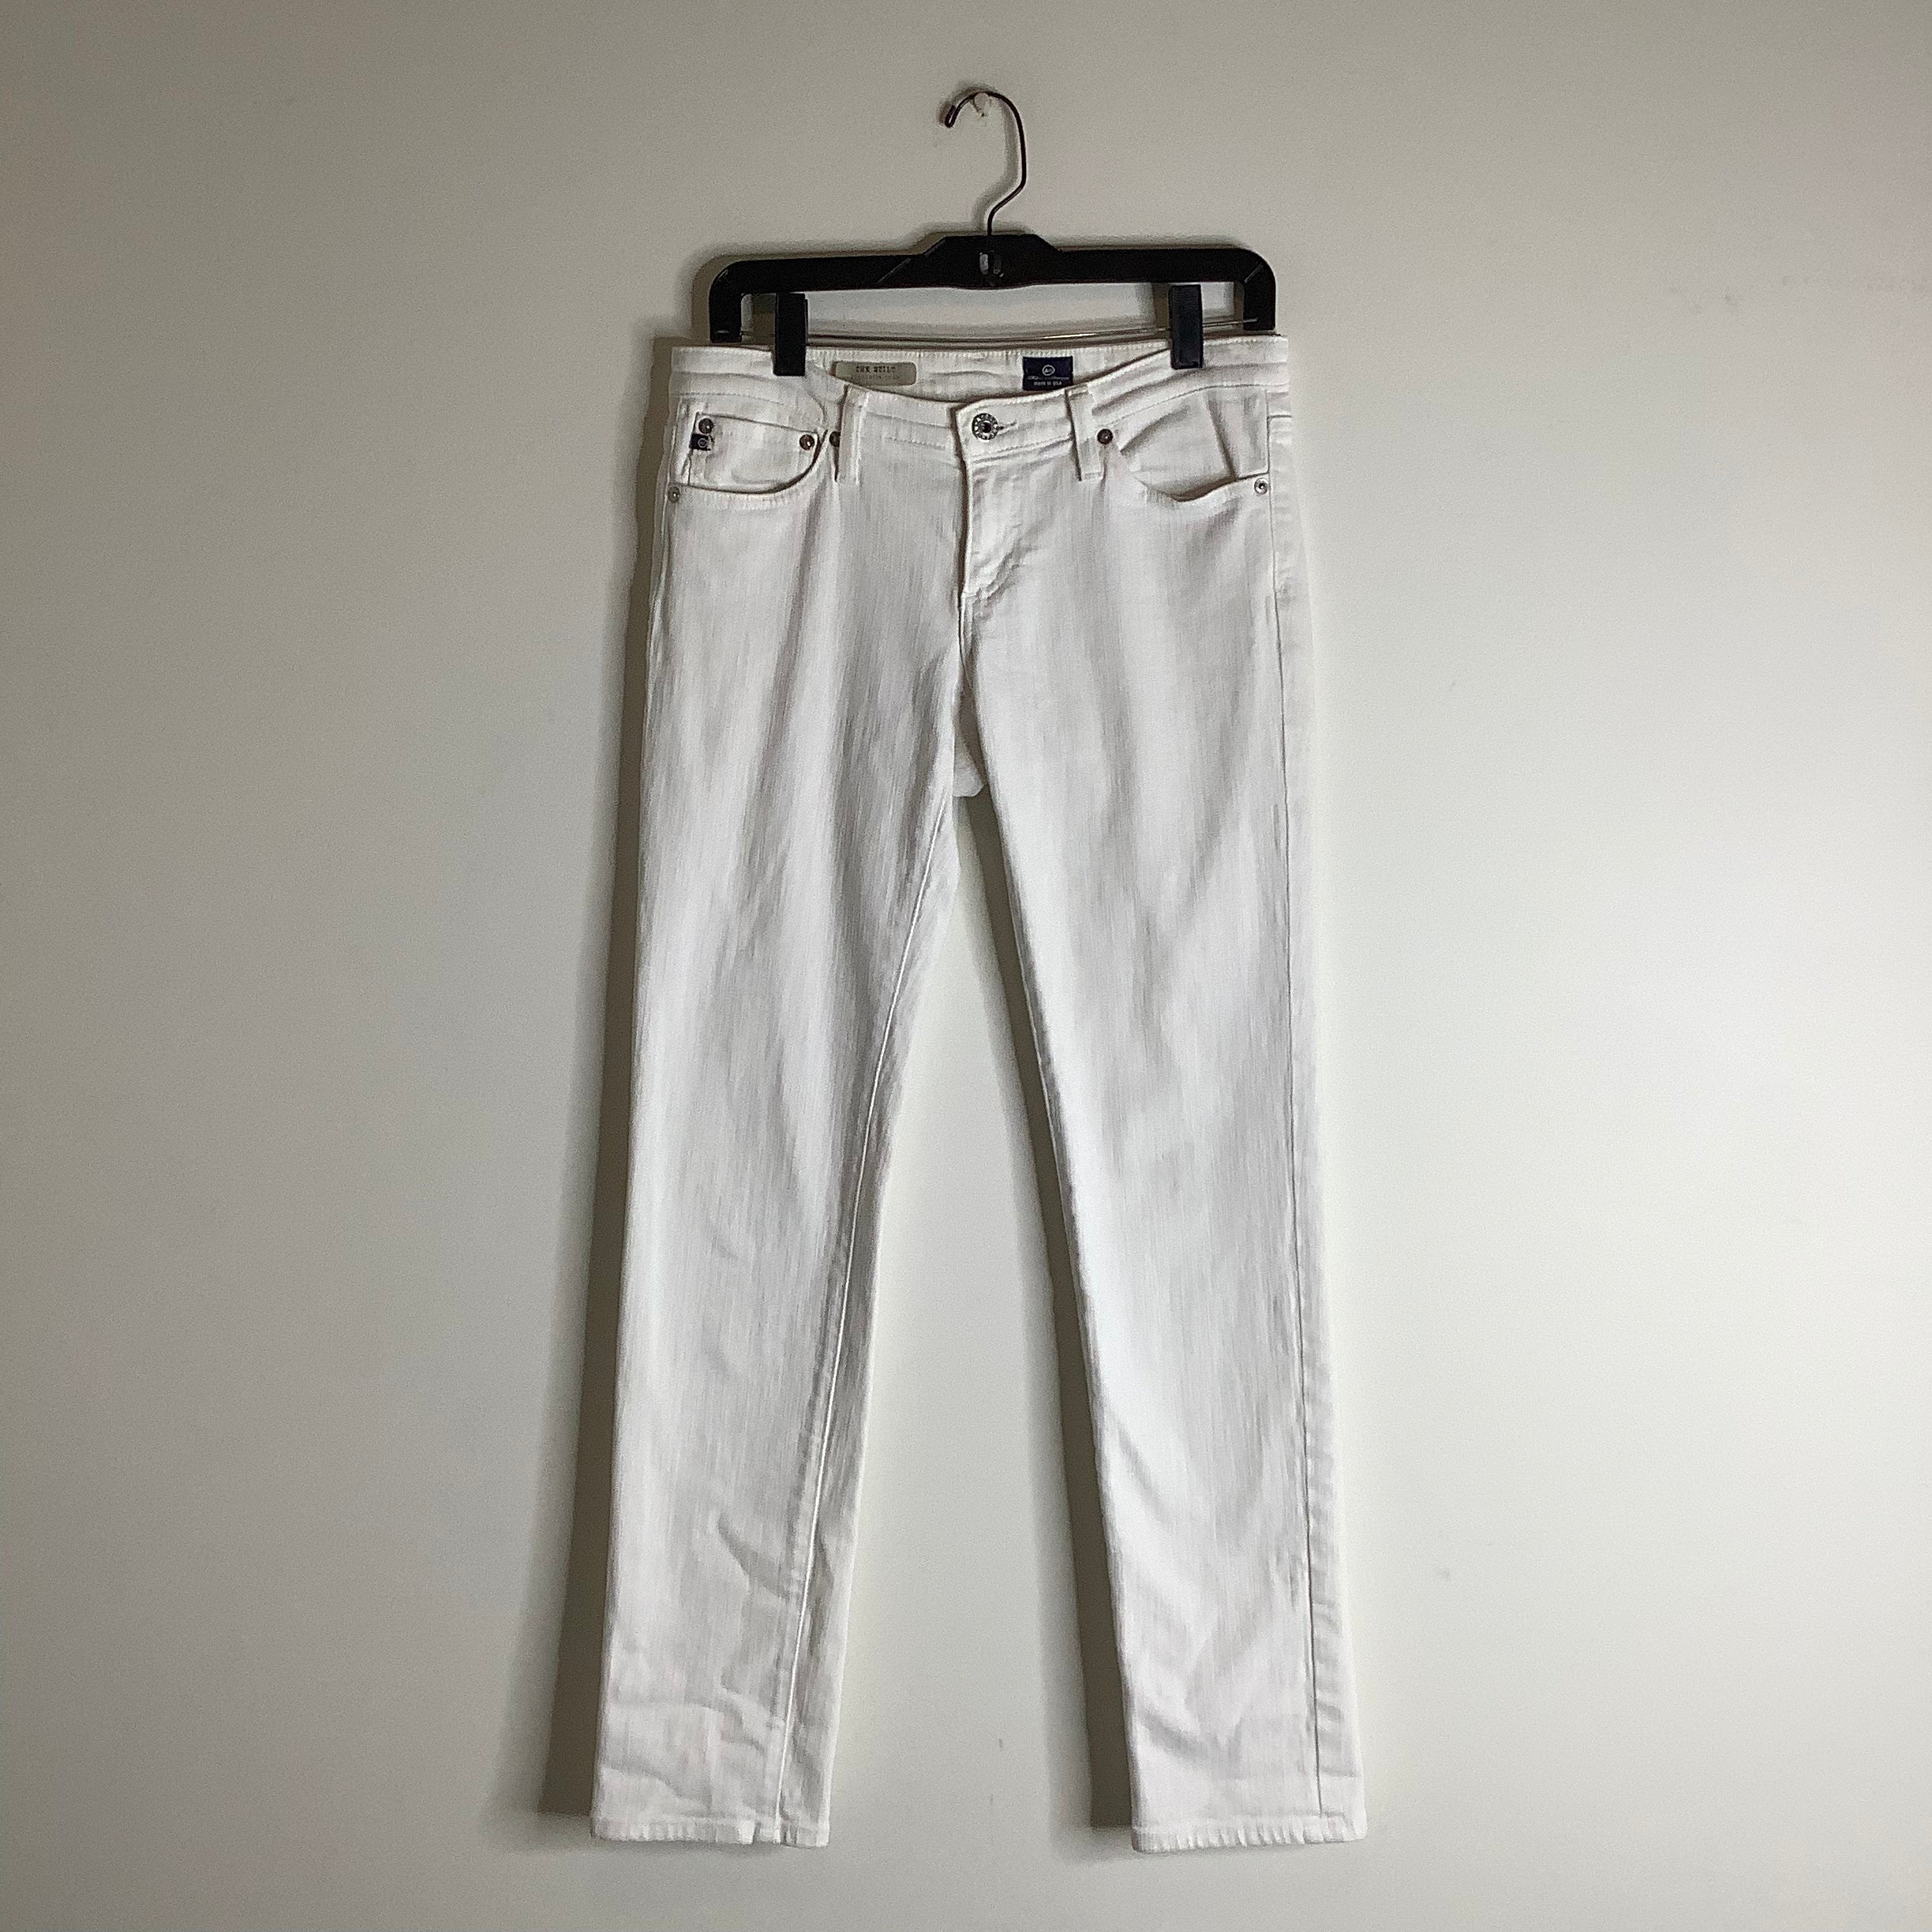 Adriano Goldschmied White Pants Size 28